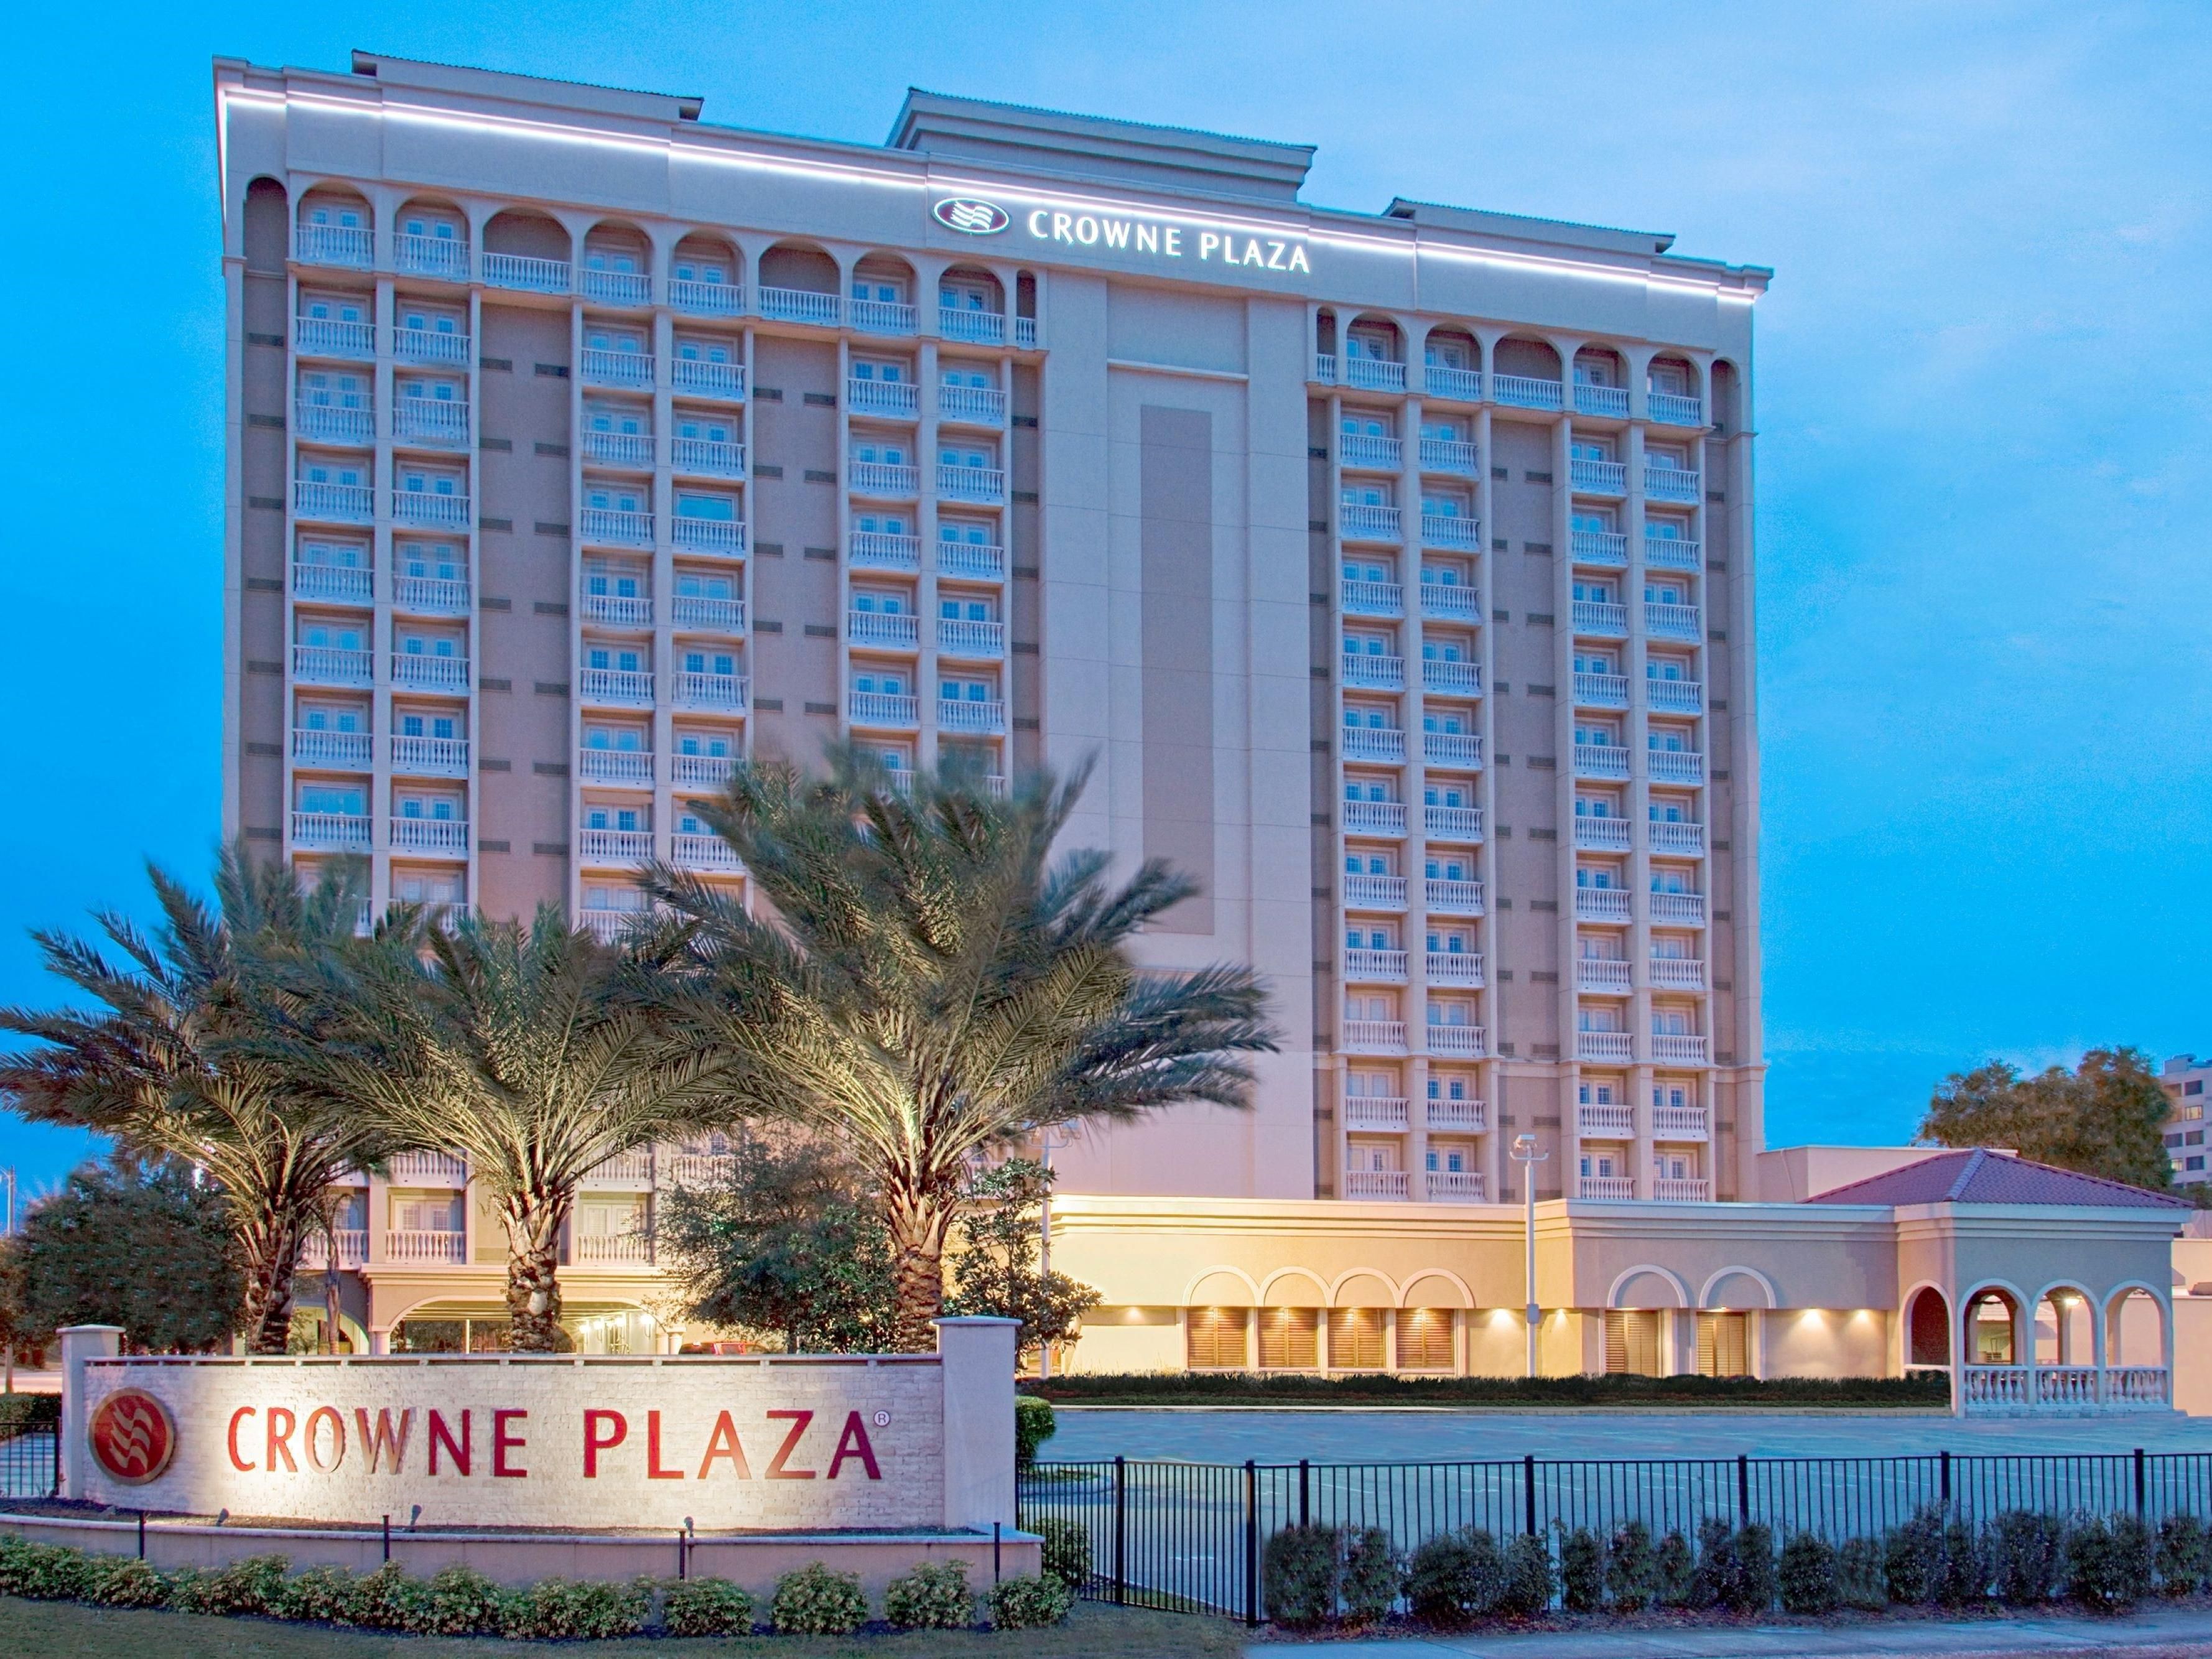 Enjoy the convenience of our complimentary shuttle, offering hassle-free travel to iconic attractions within a three-mile radius of our hotel. At Crowne Plaza Orlando Downtown, we go the extra mile, ensuring you have easy access to the best Orlando has to offer, right from our doorstep.